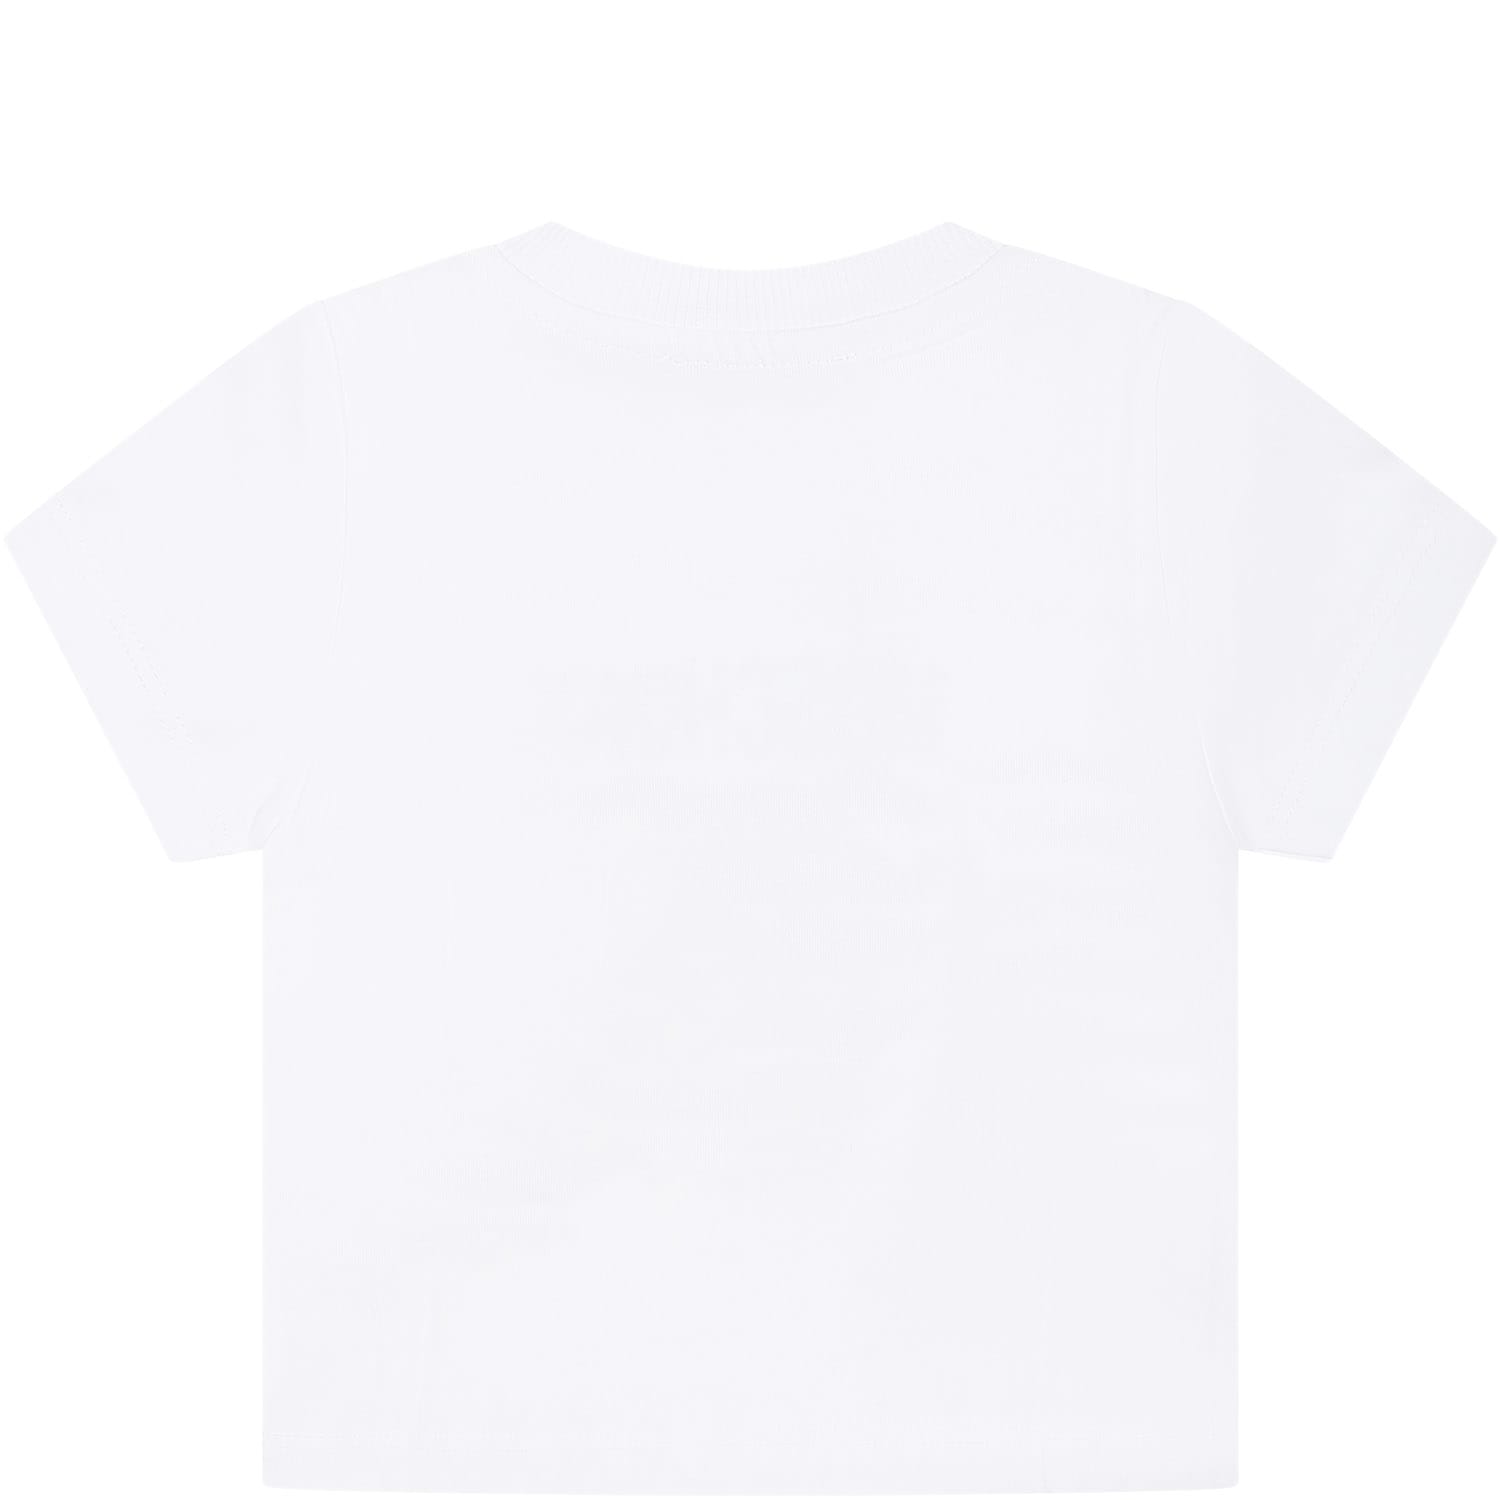 Shop Moschino White T-shirt For Baby Kids With Teddy Bear